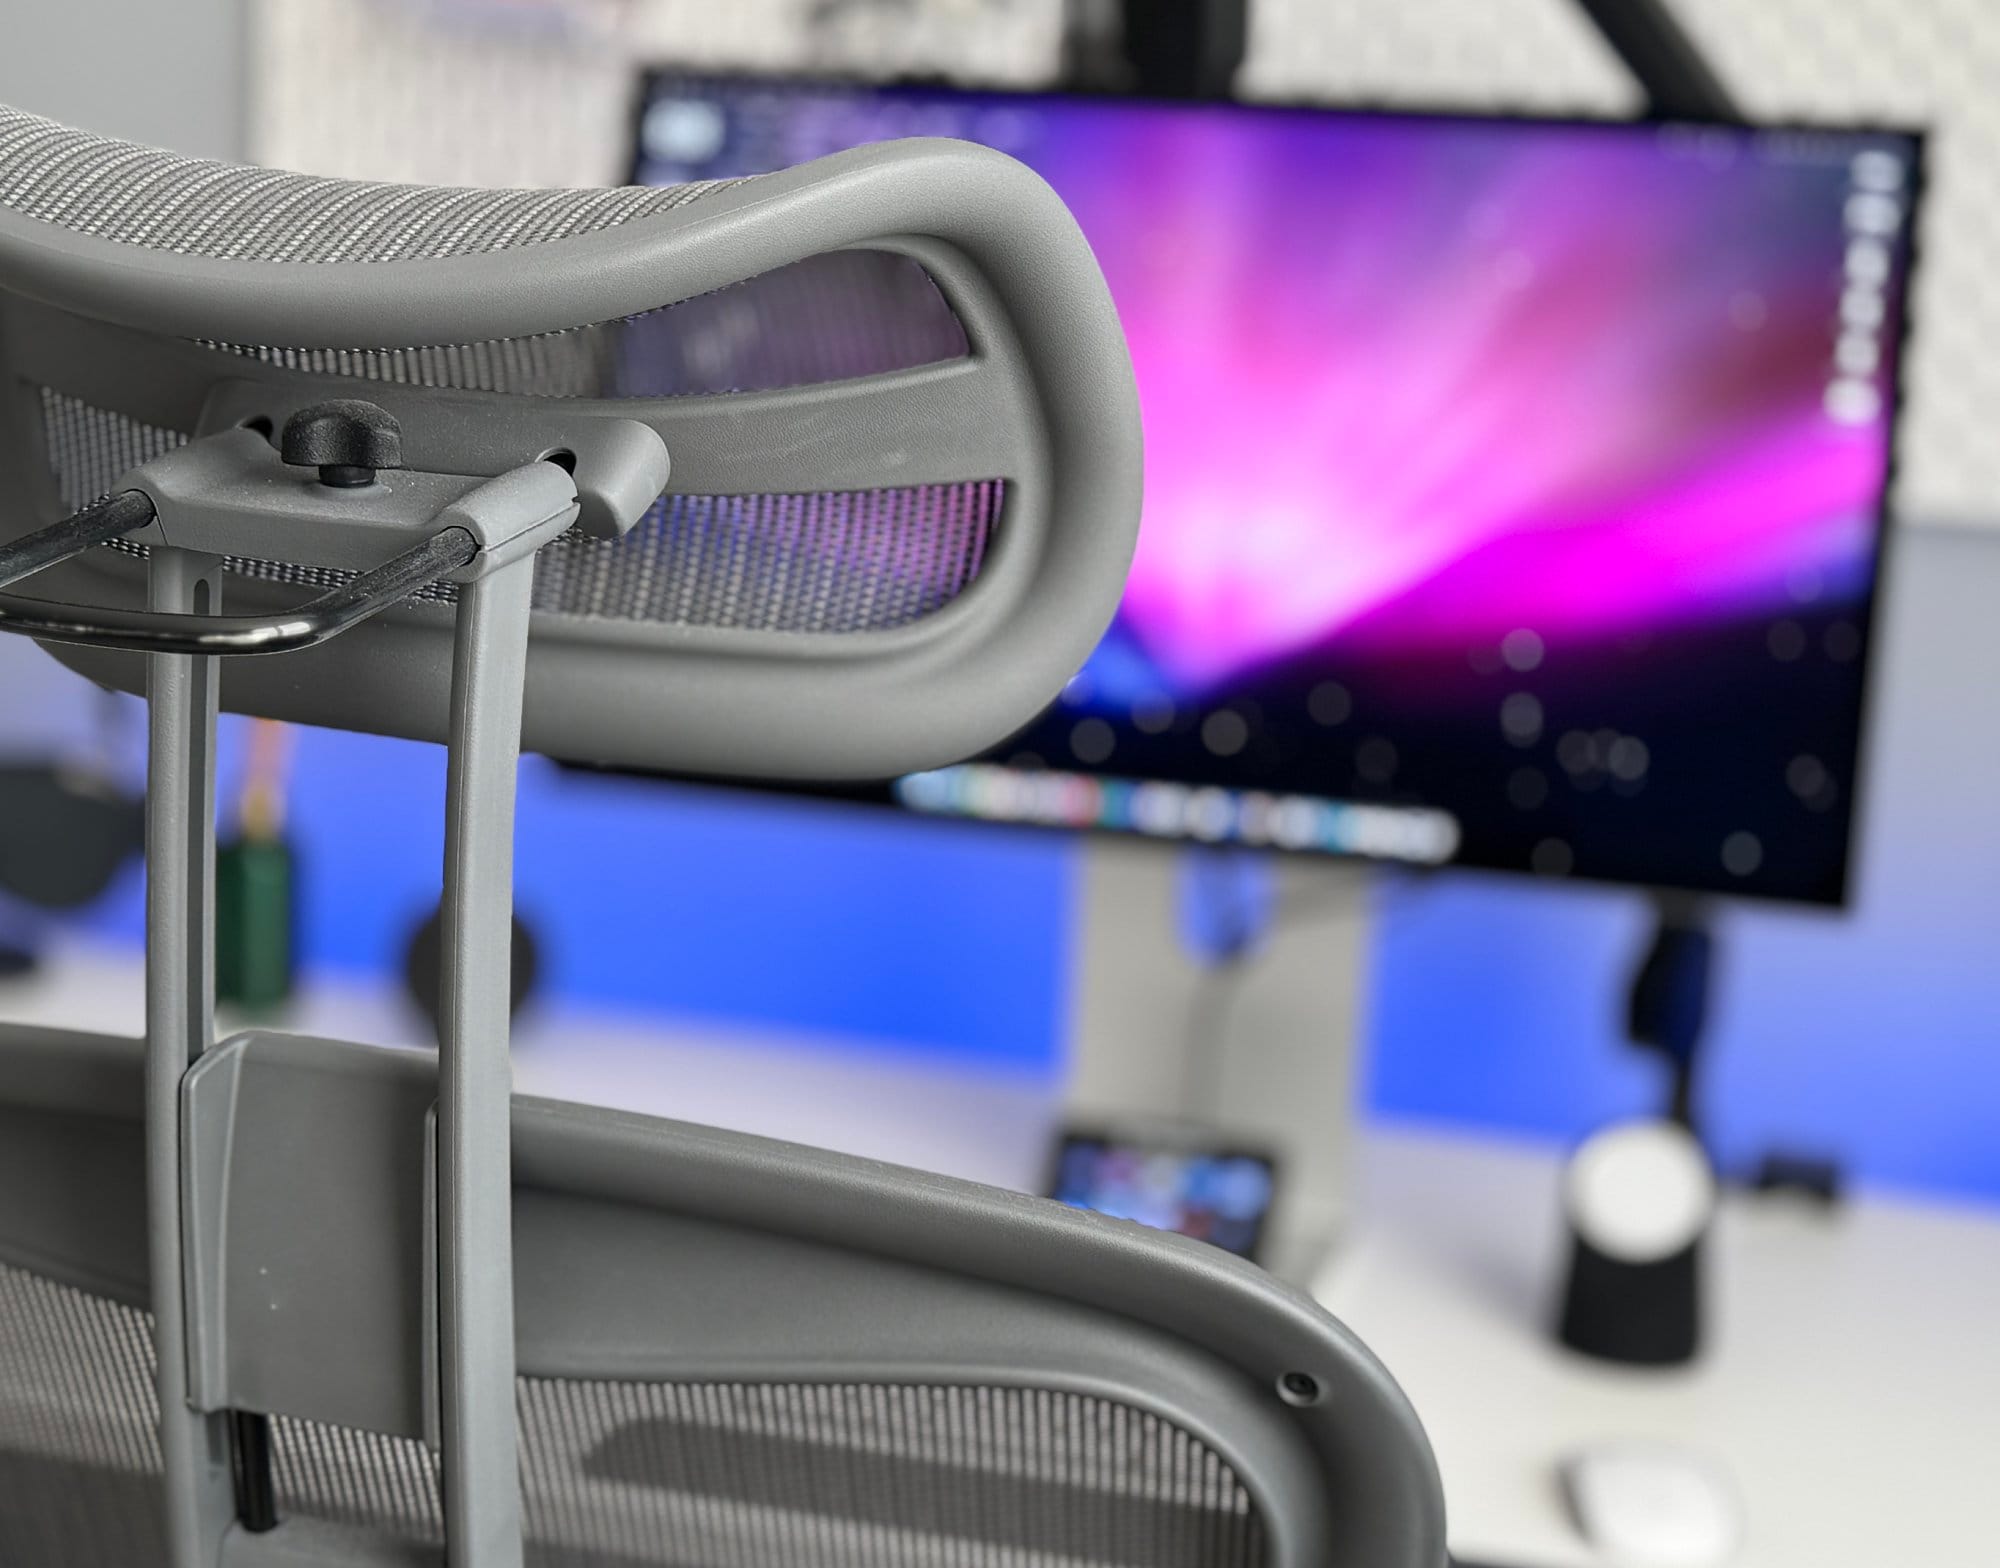  A close-up view of an ergonomic office chair with a focus on the armrest, overlooking a desk with a monitor, keyboard, and a speaker, all in a modern workspace setting